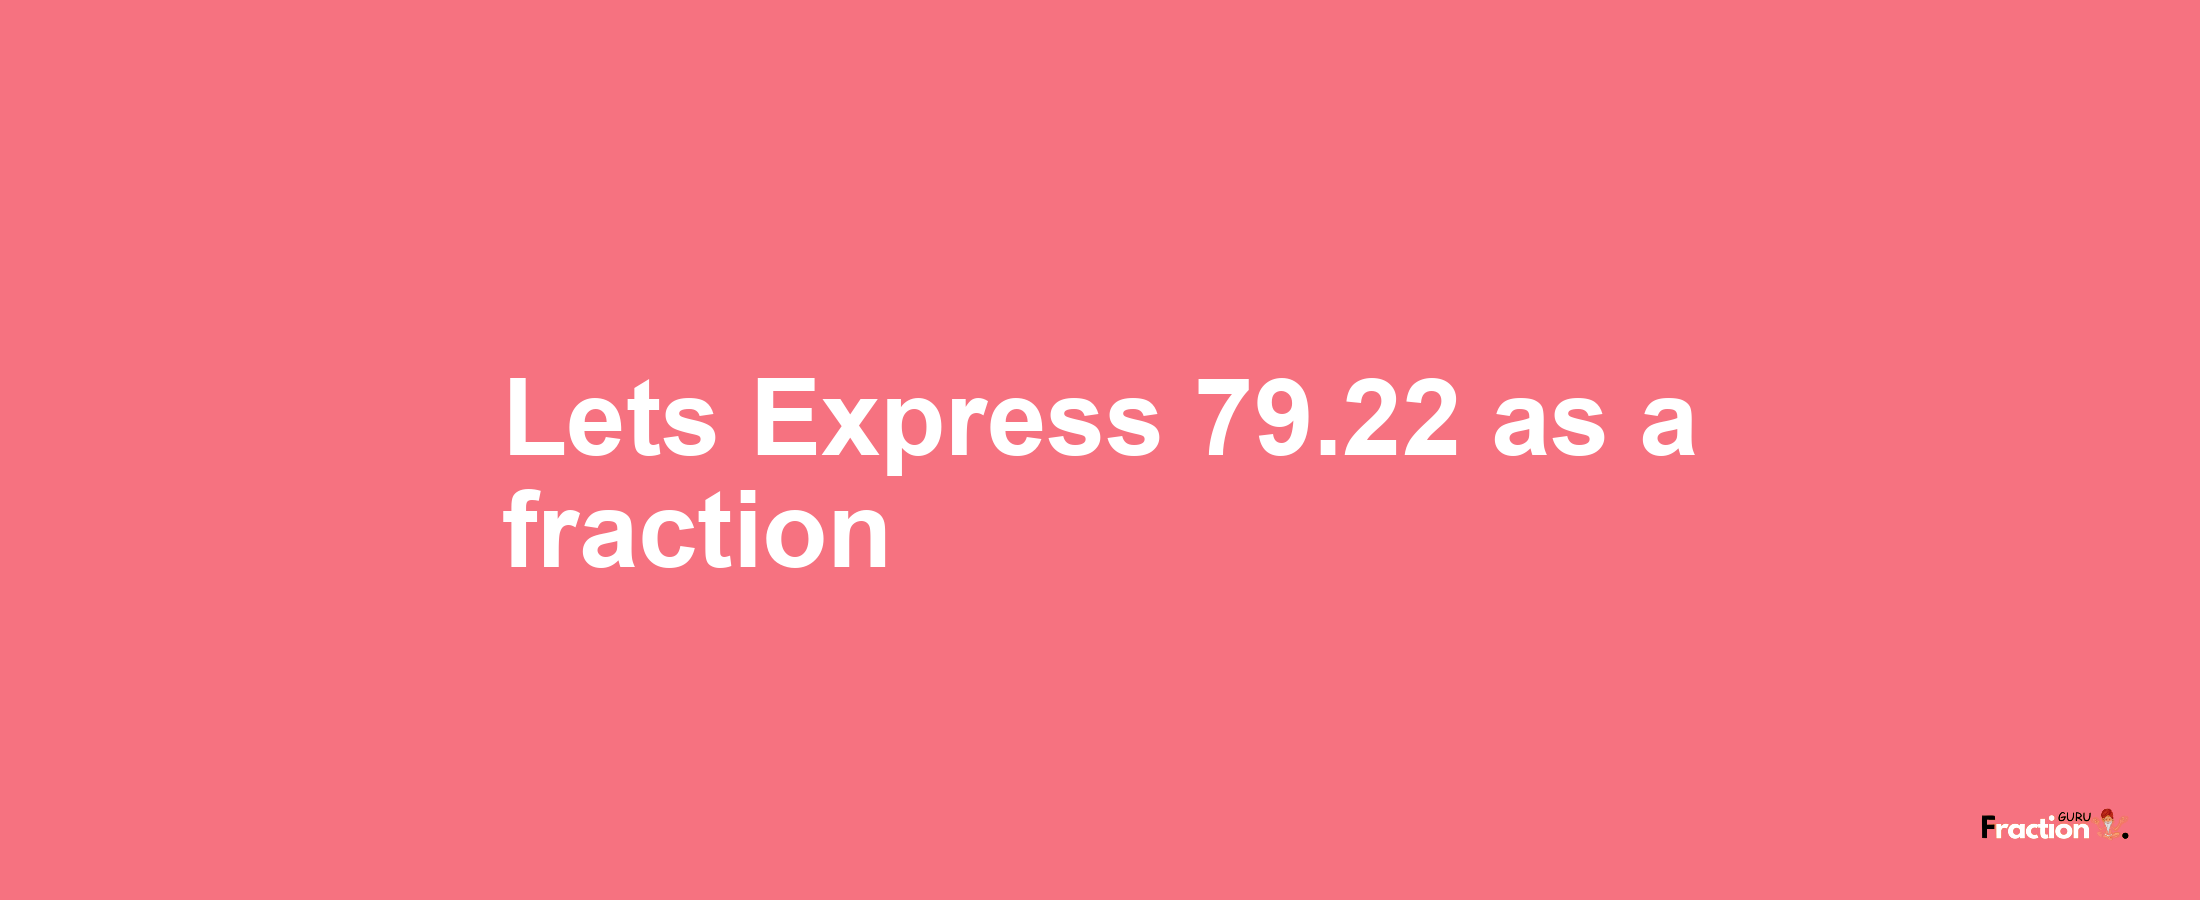 Lets Express 79.22 as afraction